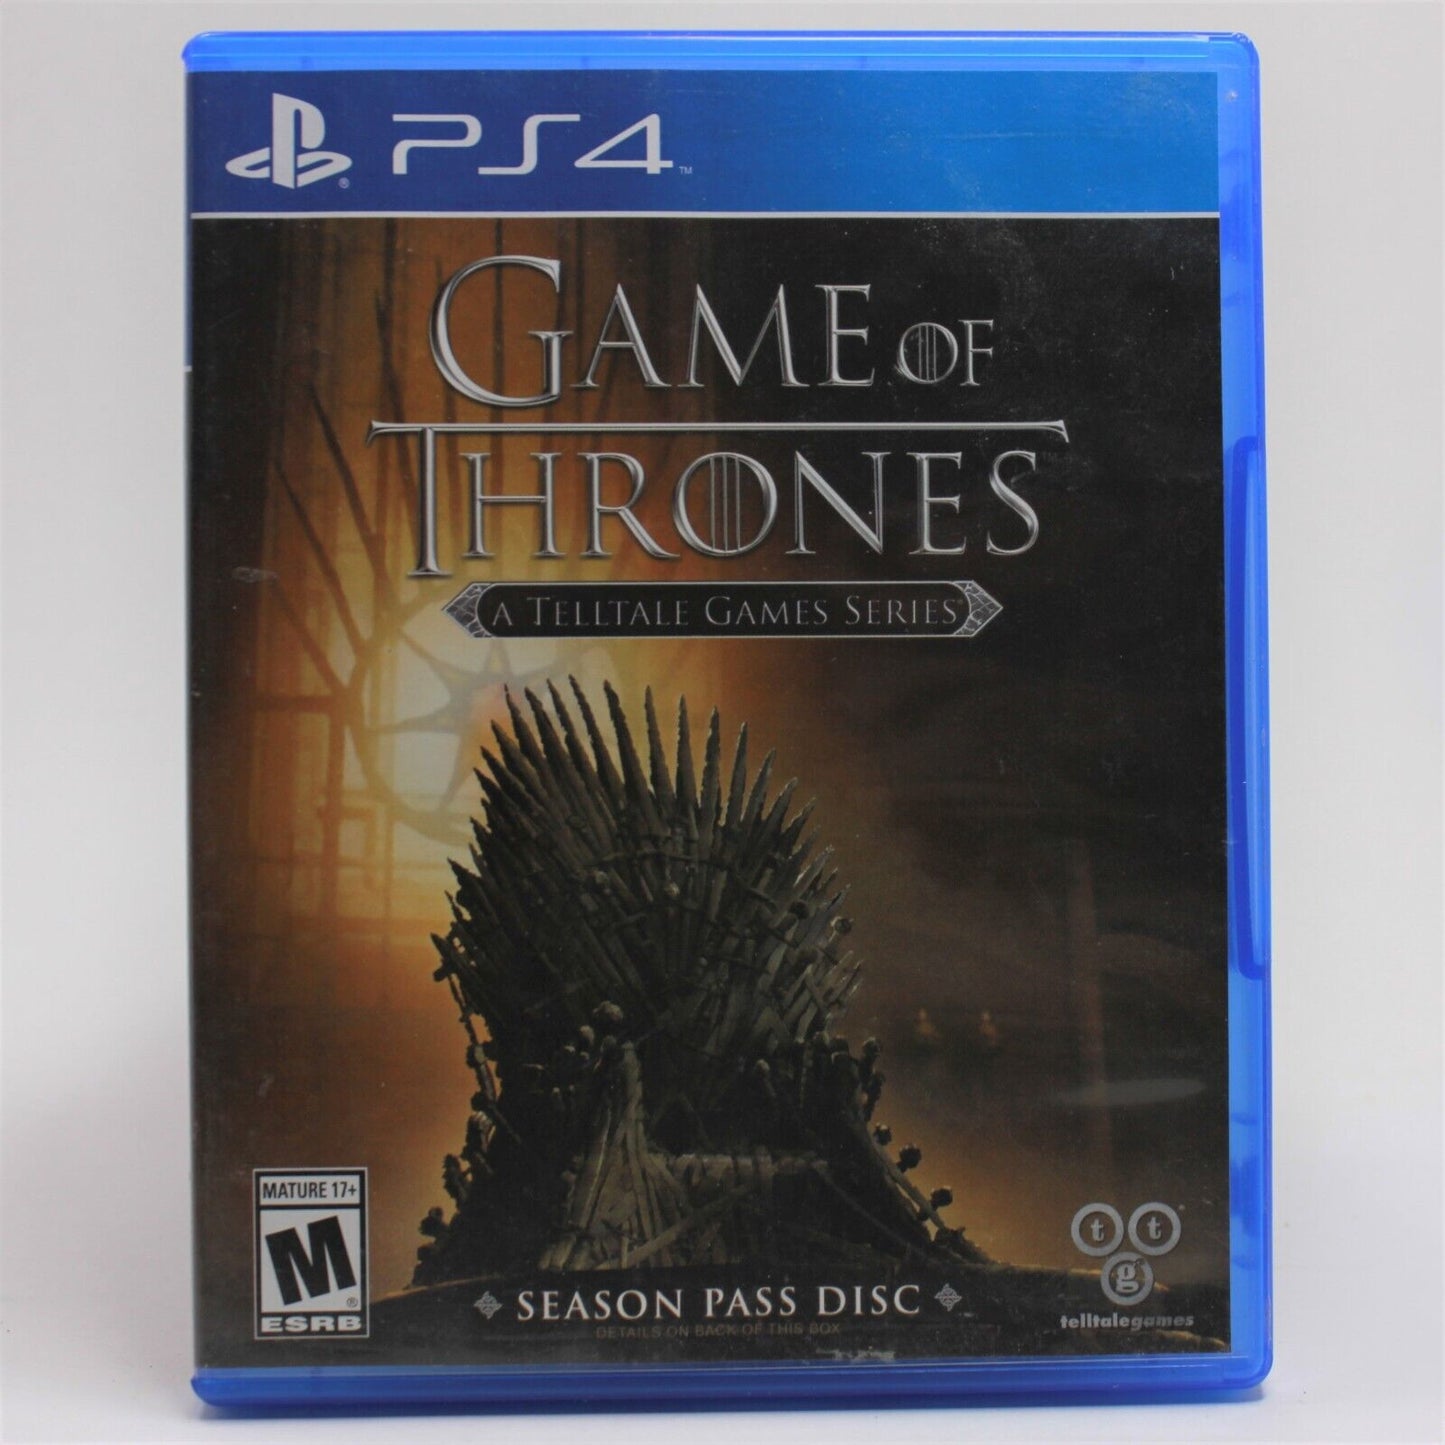 PS4 Game of Thrones A Telltale Games Series Preowned